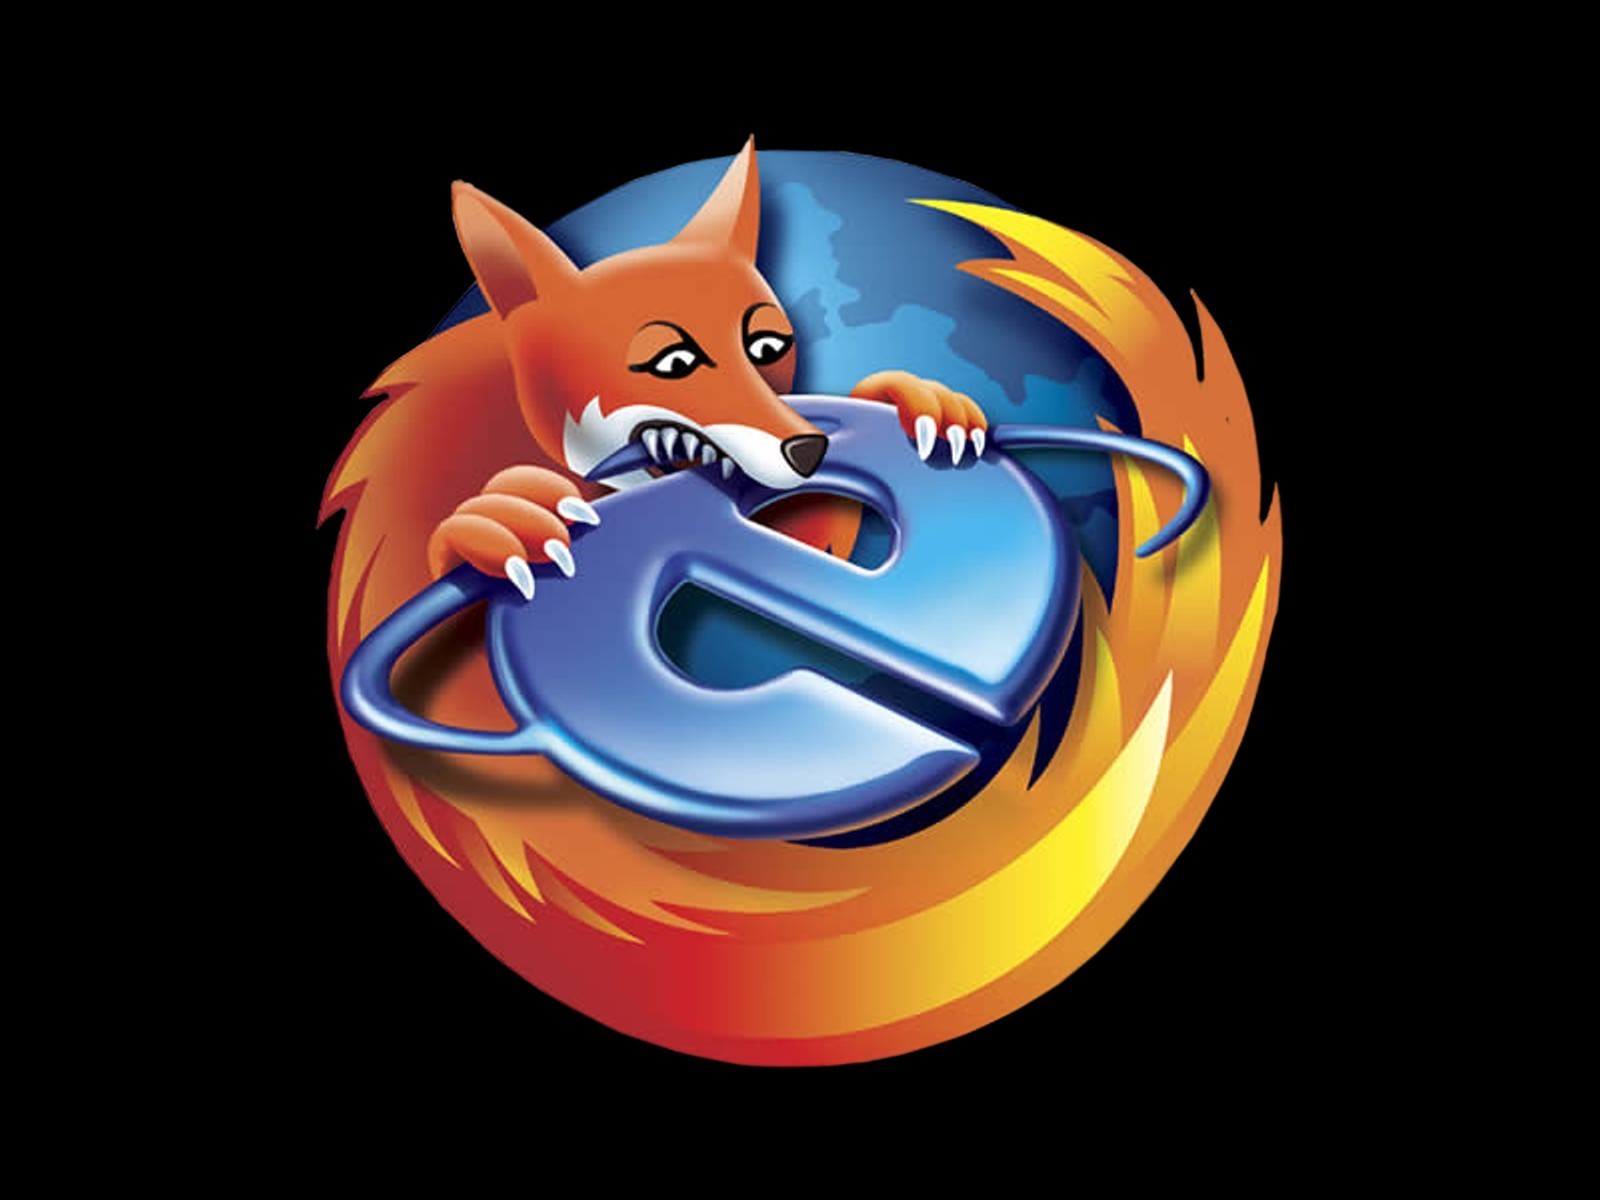 Firefox Image Icons Wallpaper And Photos On